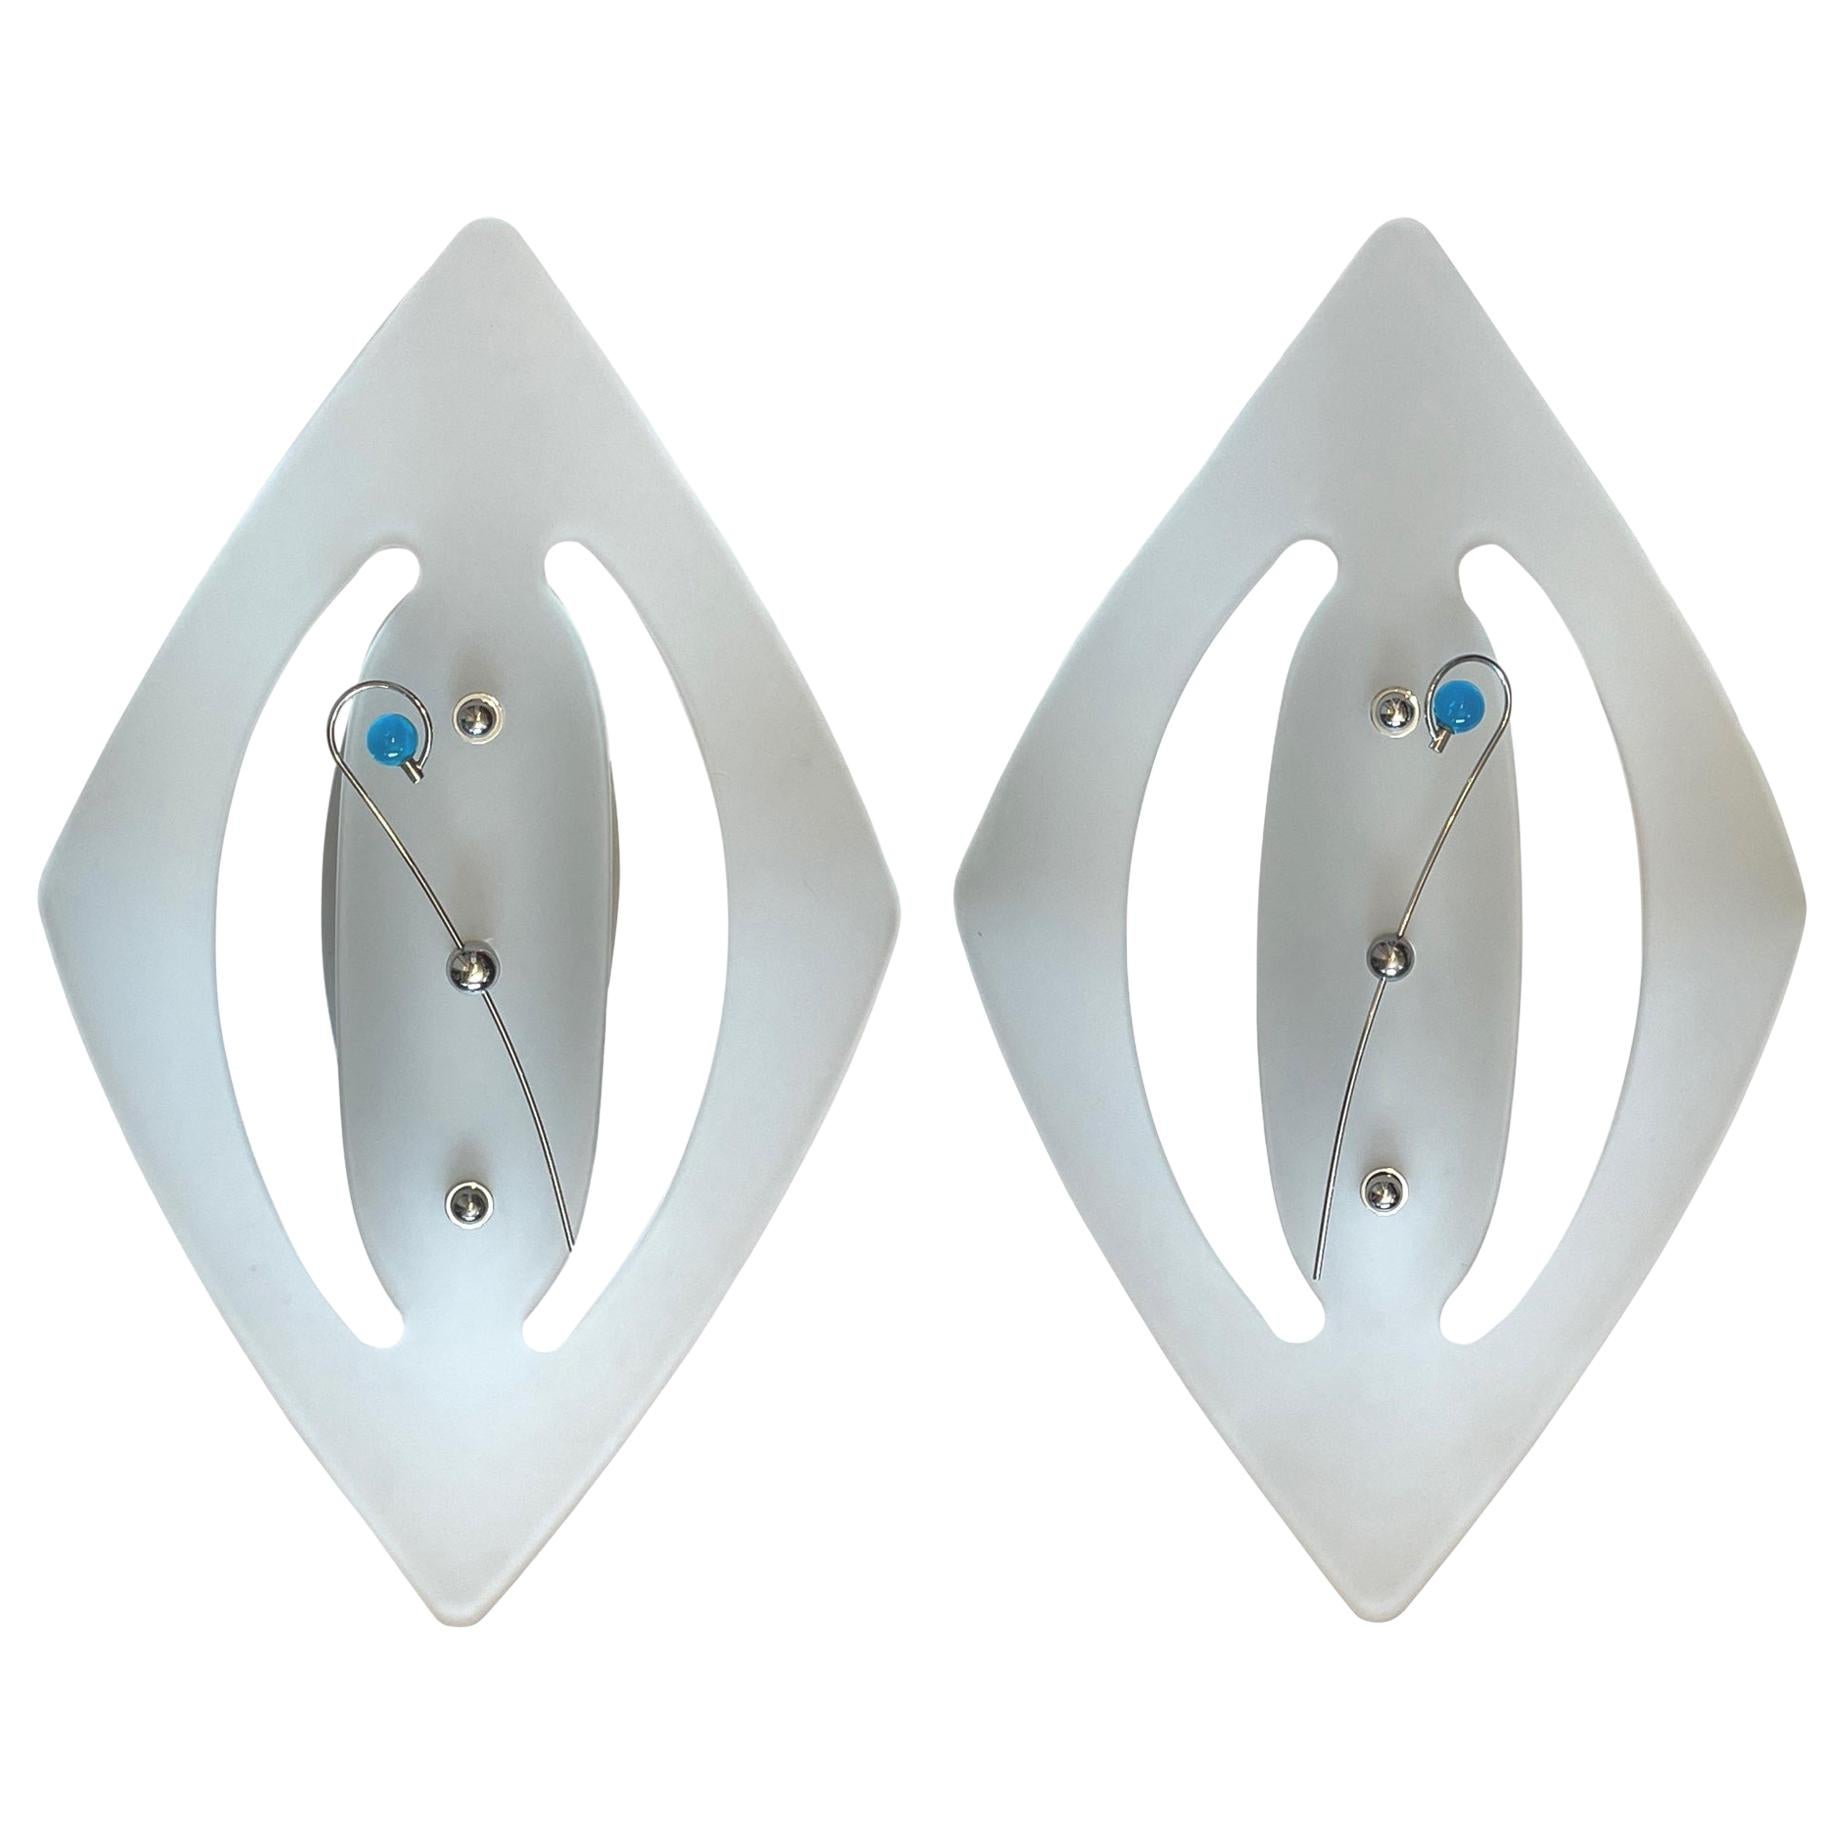 Pair of Monumental Modern Italian Sconces by Zonca Voghera, Italy, 1980s For Sale